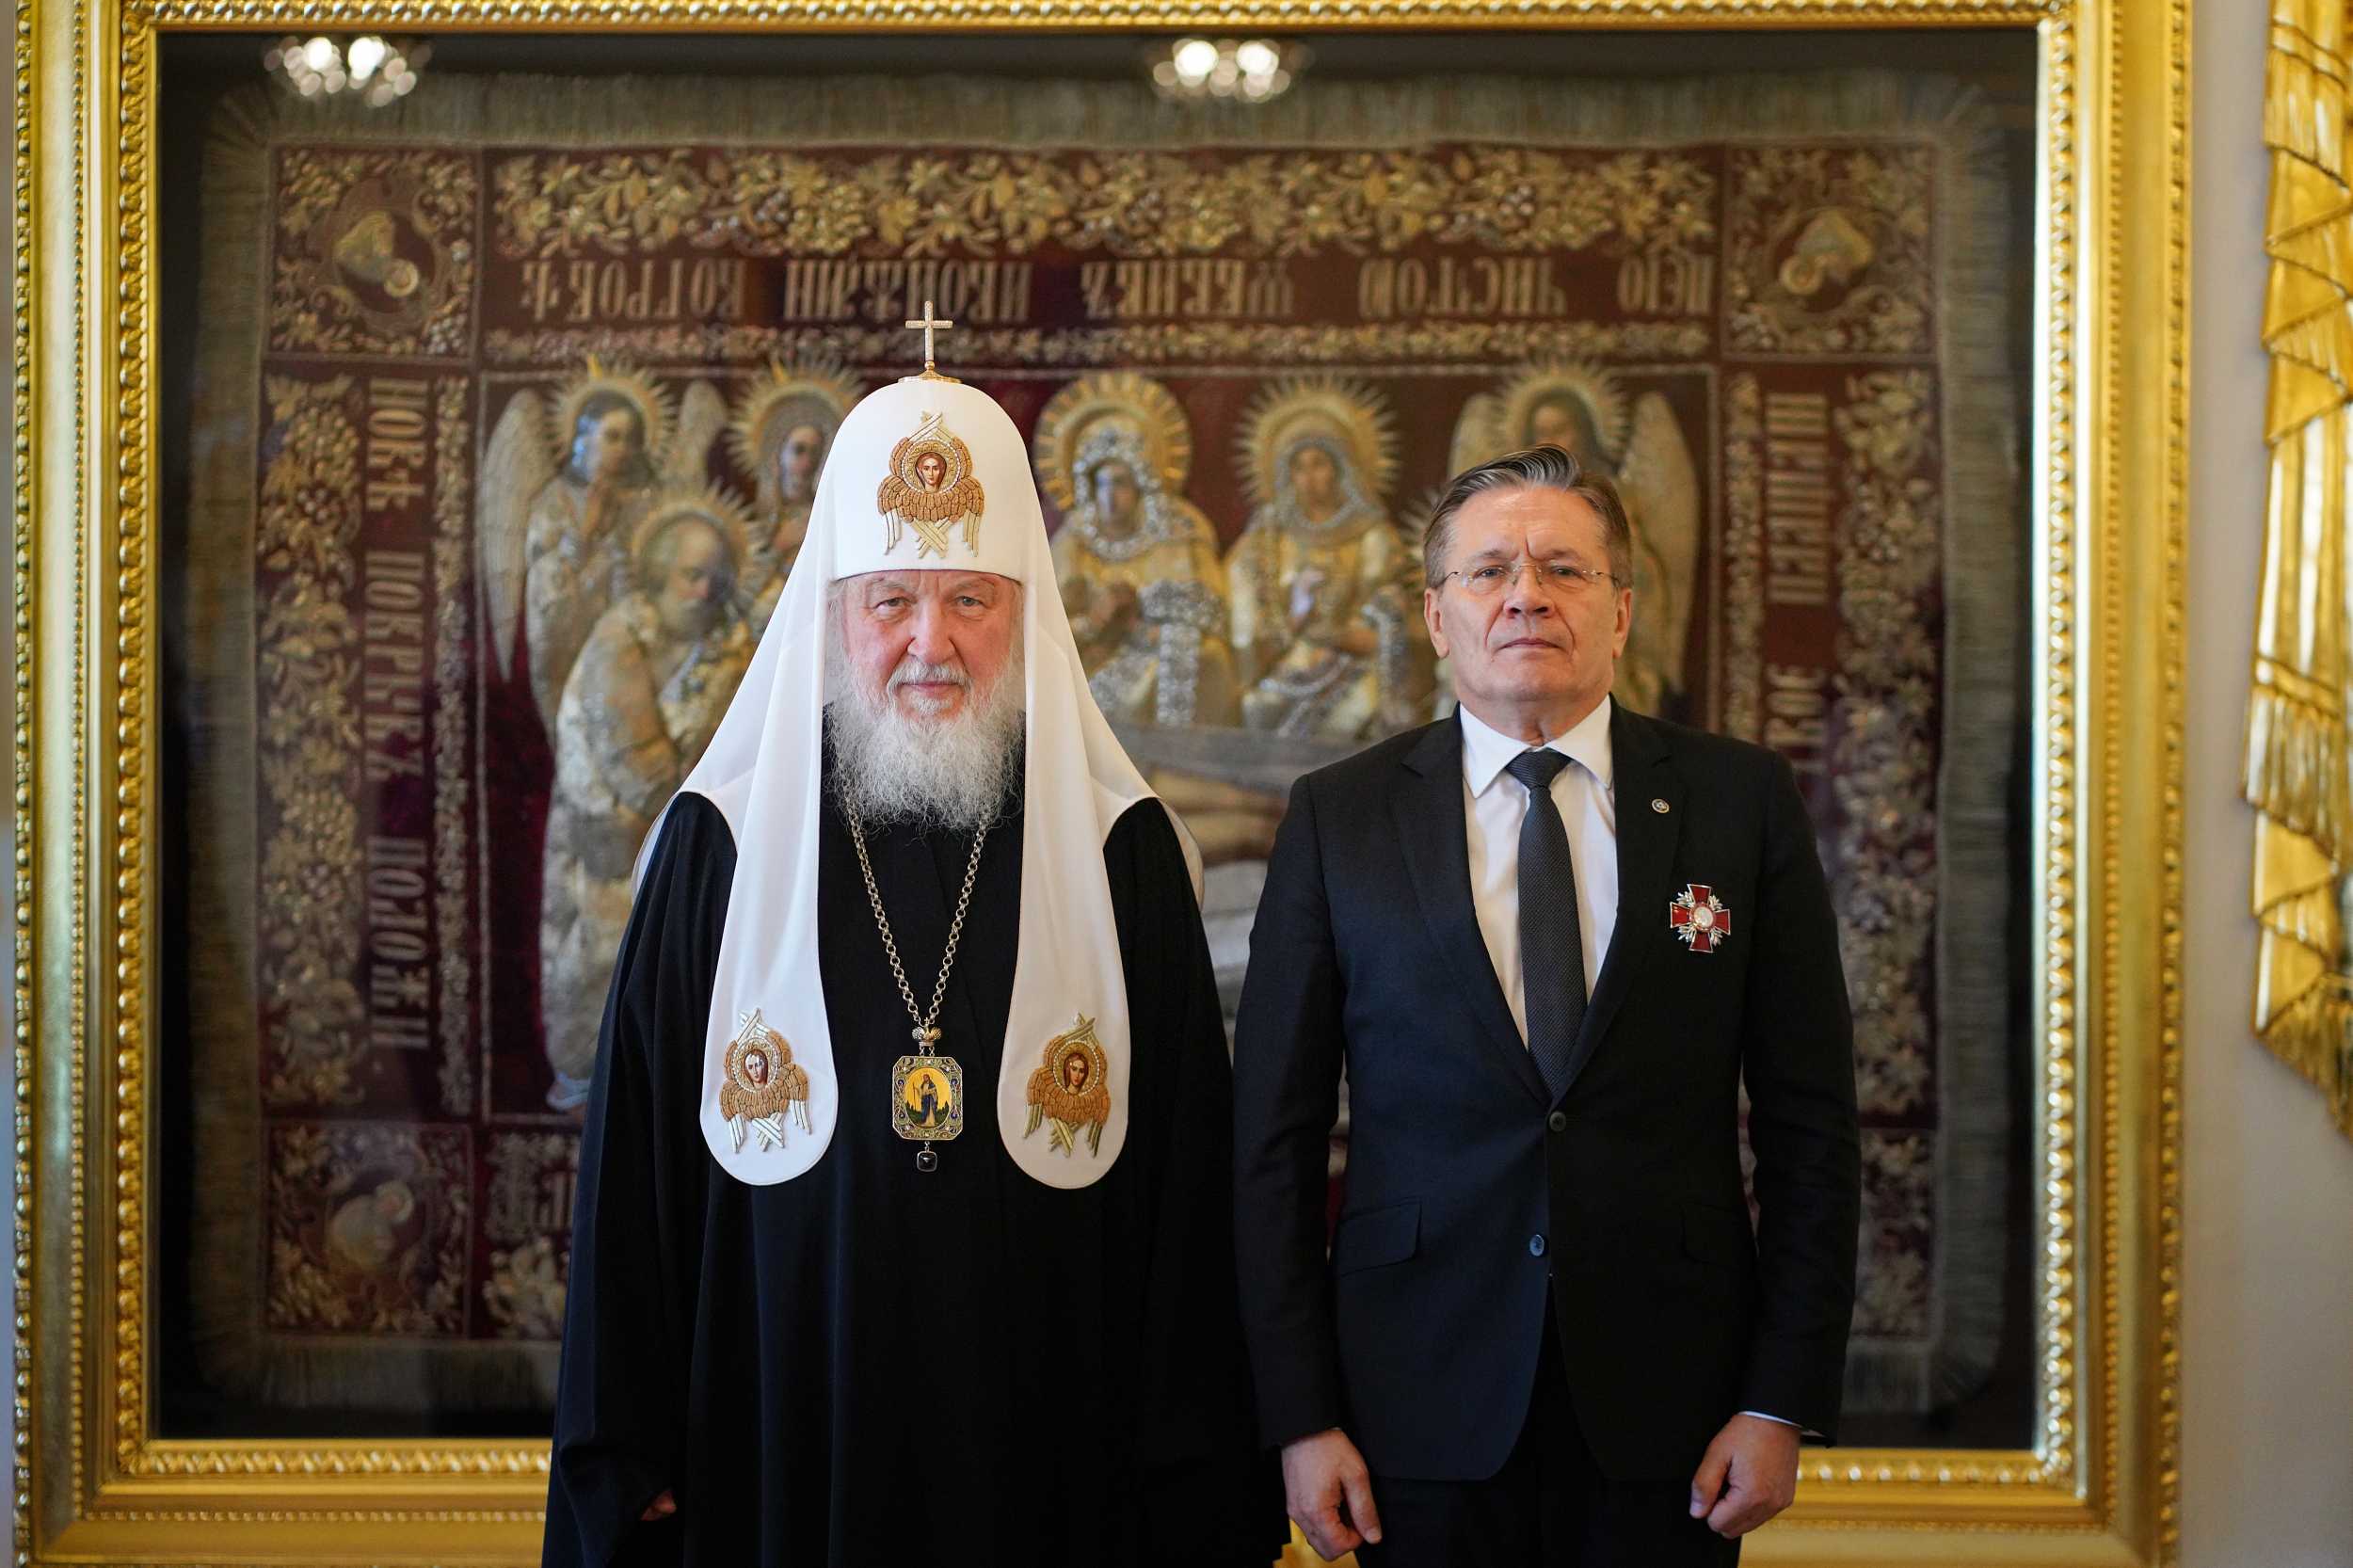 Patriarch Kirill Awarded Order of the Blessed Prince Alexander Nevsky to Director General of the State Atomic Energy Corporation Rosatom